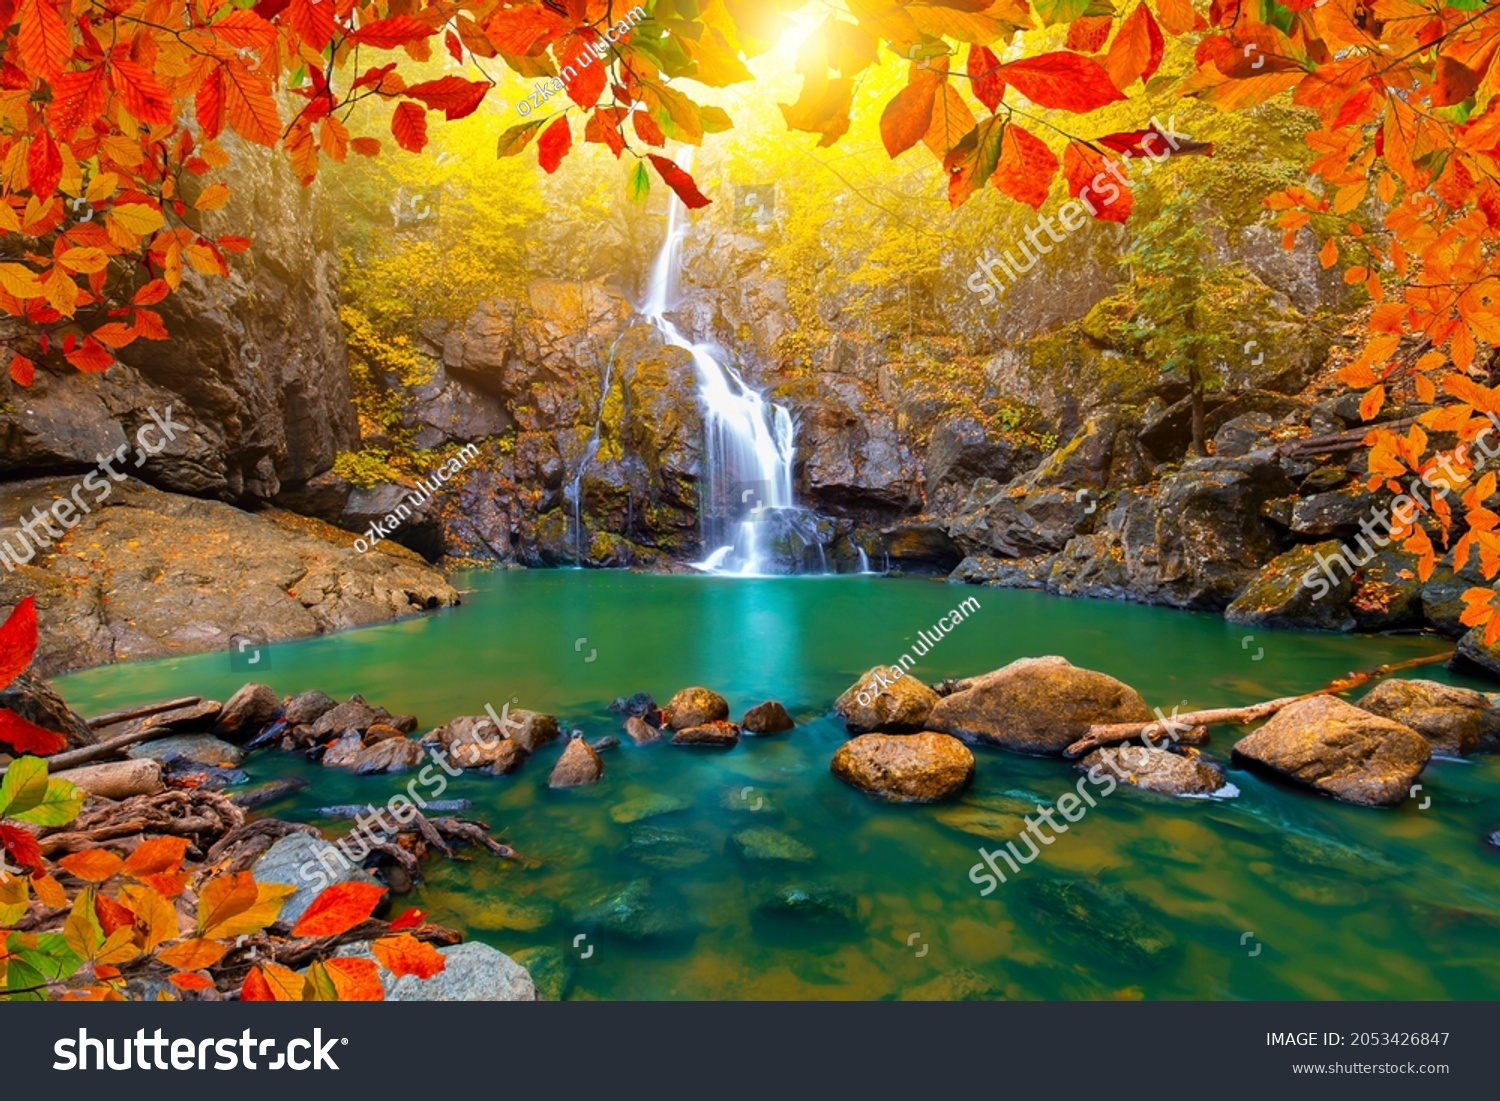 Autumn colors in stunning waterfall scenery. nature landscape in the depths of the forest. autumn view in nature. Erikli waterfall, Yalova, Turkey. #2053426847